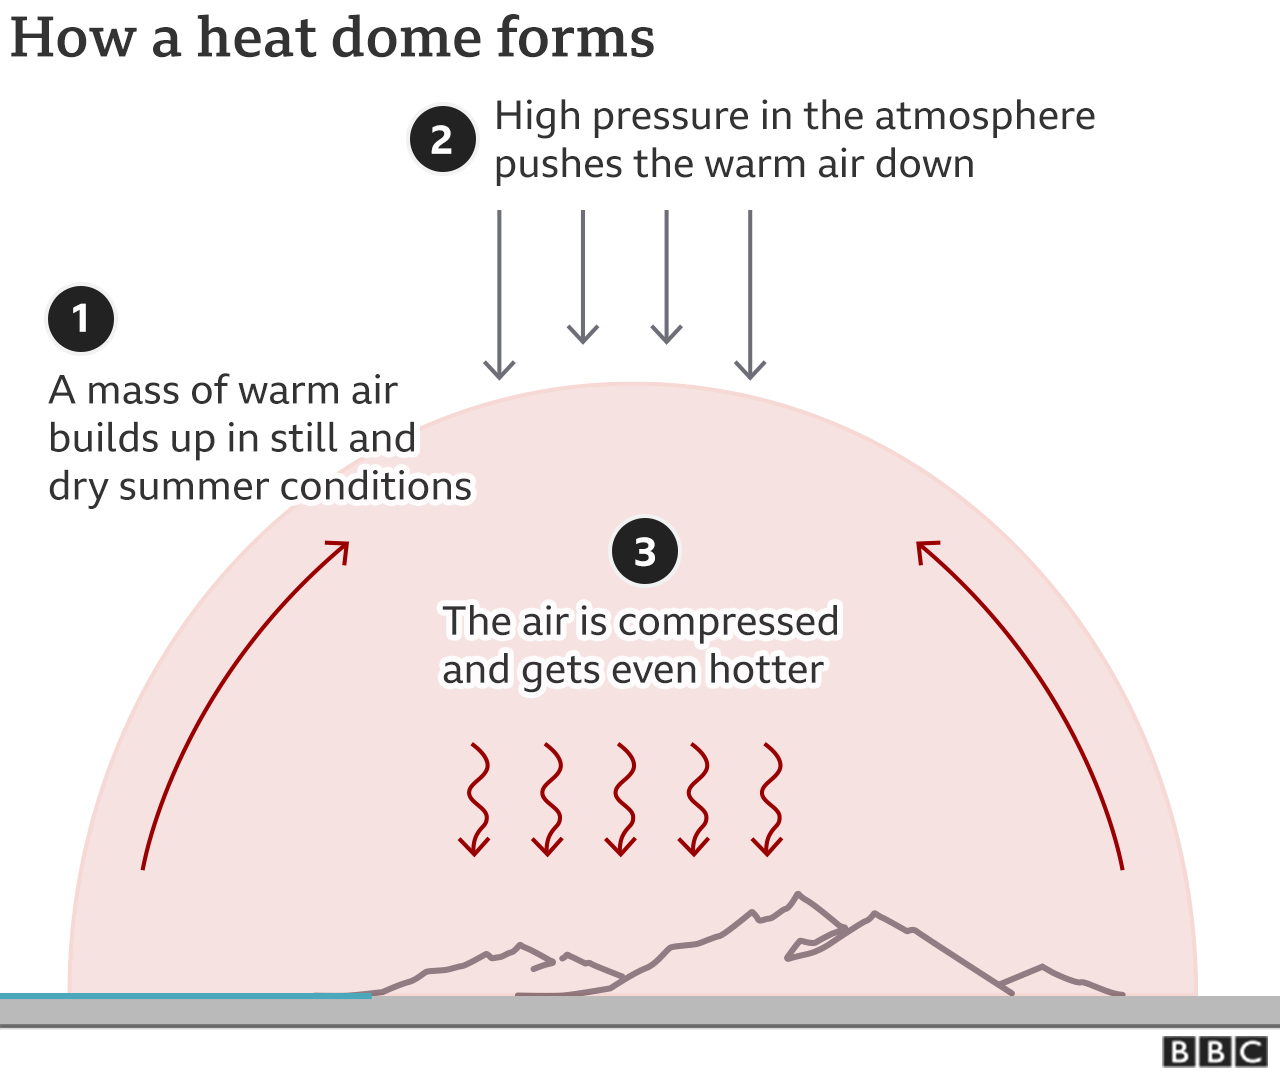 A graphic showing how heat domes are formed. 1) A mass of warm air builds up in still and dry summer conditions 2) High pressure in the atmosphere pressures the warm air down 3) The air is compressed and gets even hotter